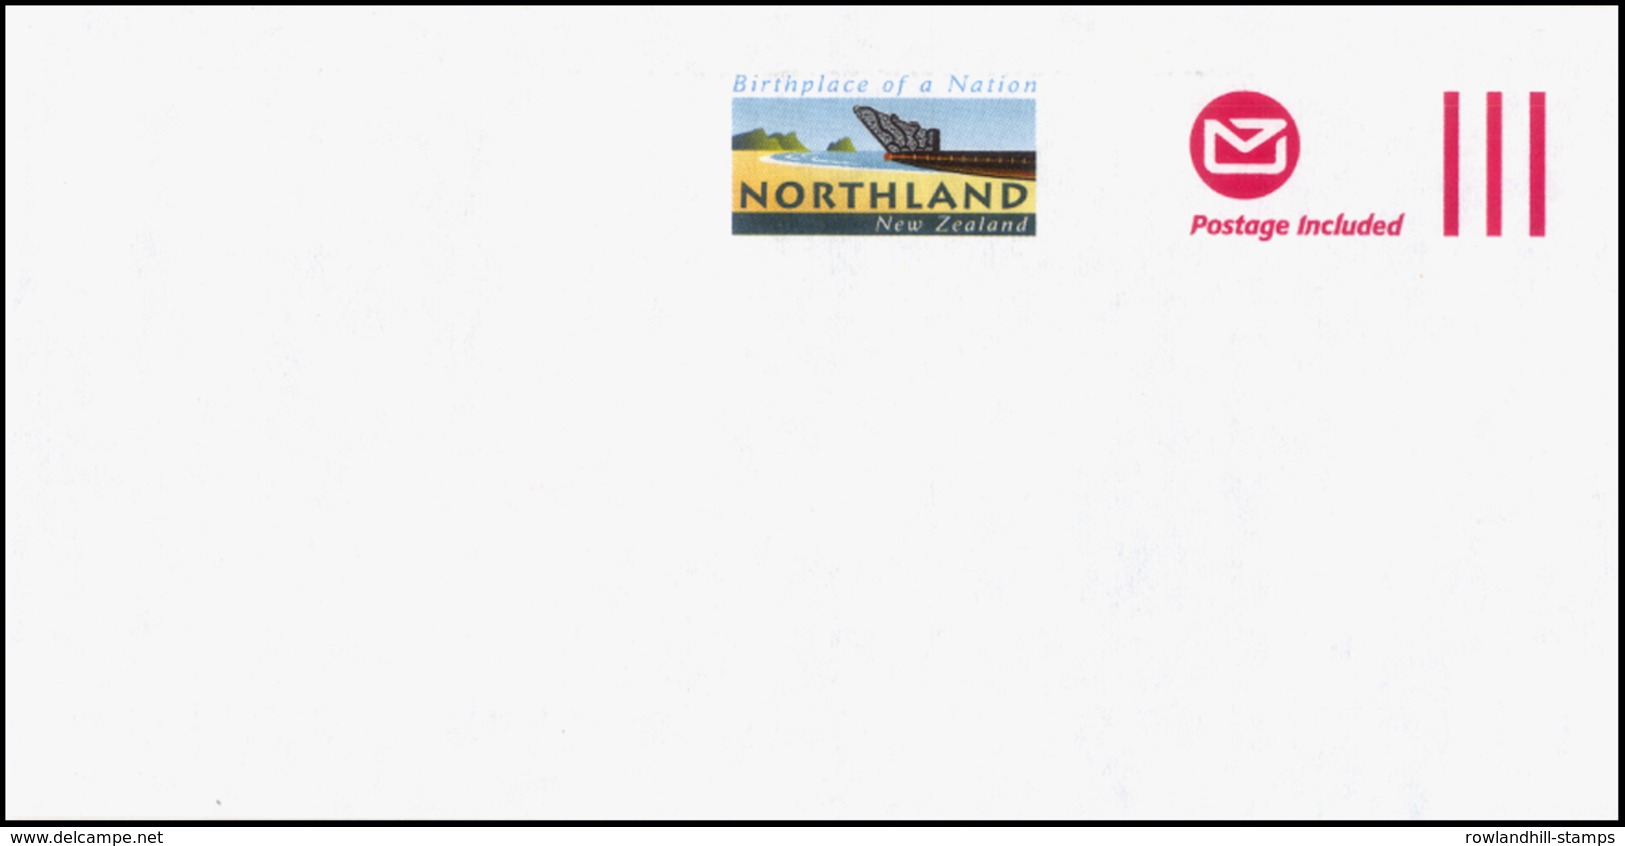 New Zealand, Official Postal Envelope, Stationery, Prepaid, Postage Included, Northland, Beach, Nature, Ship, Nation. - Entiers Postaux